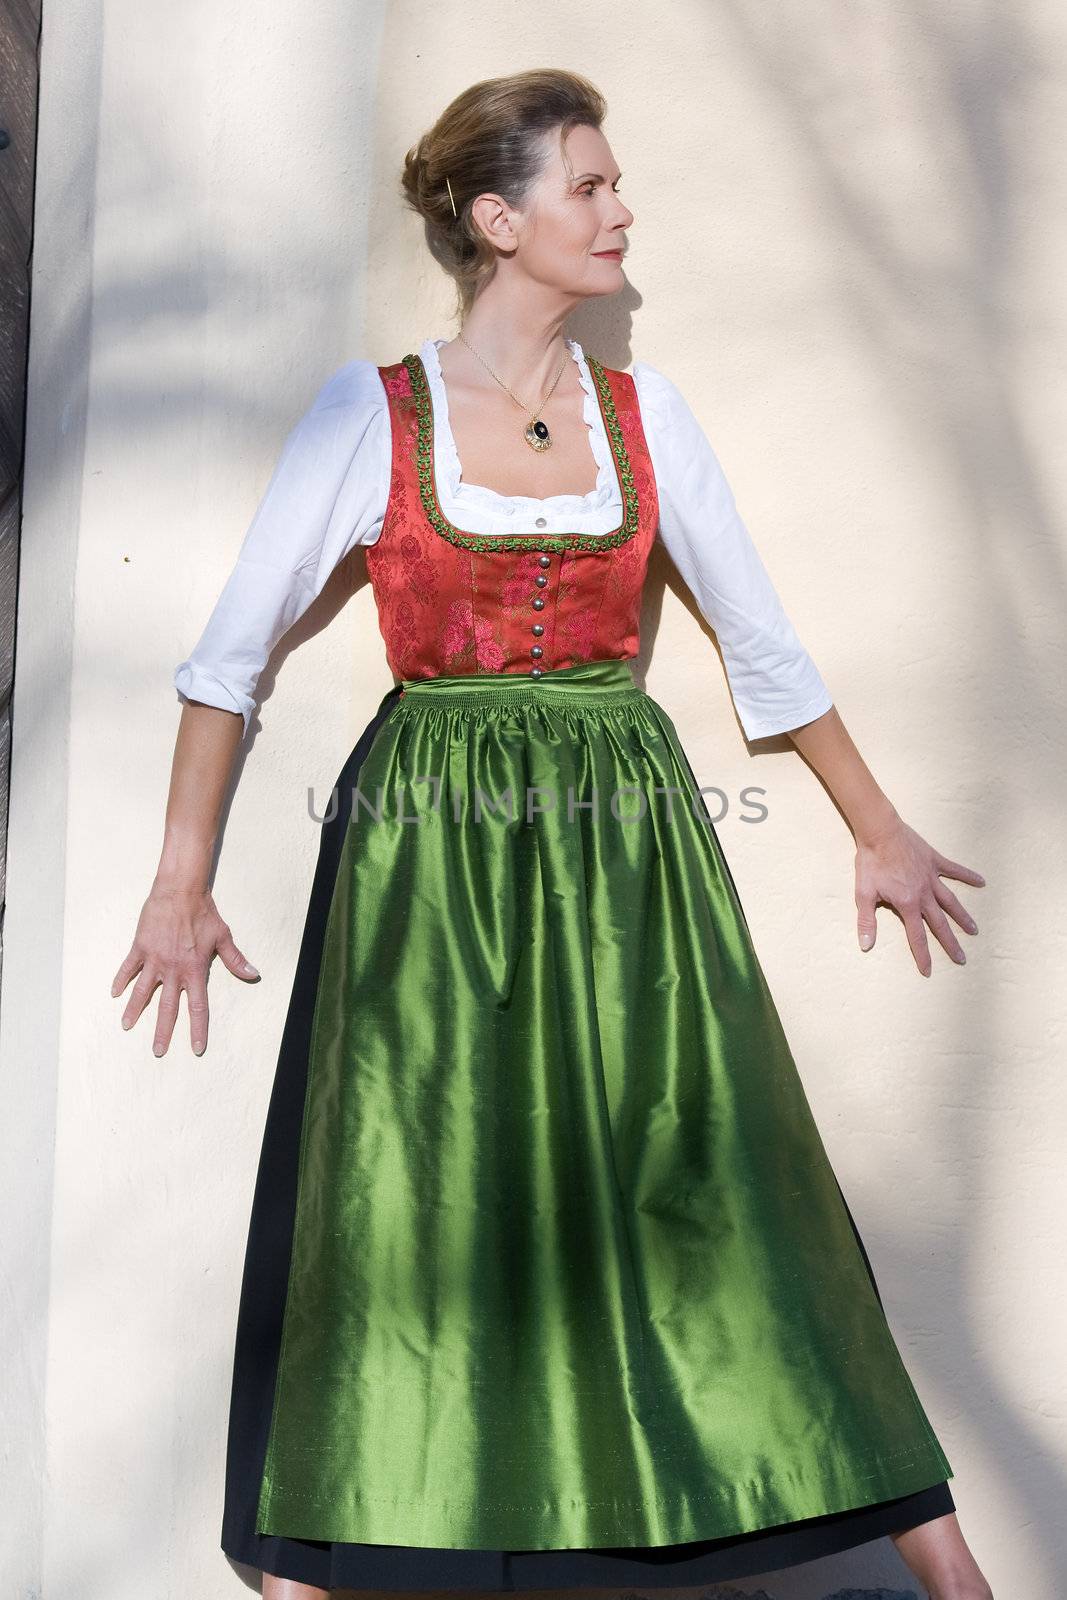 Old Bavarian woman in traditional dress by STphotography